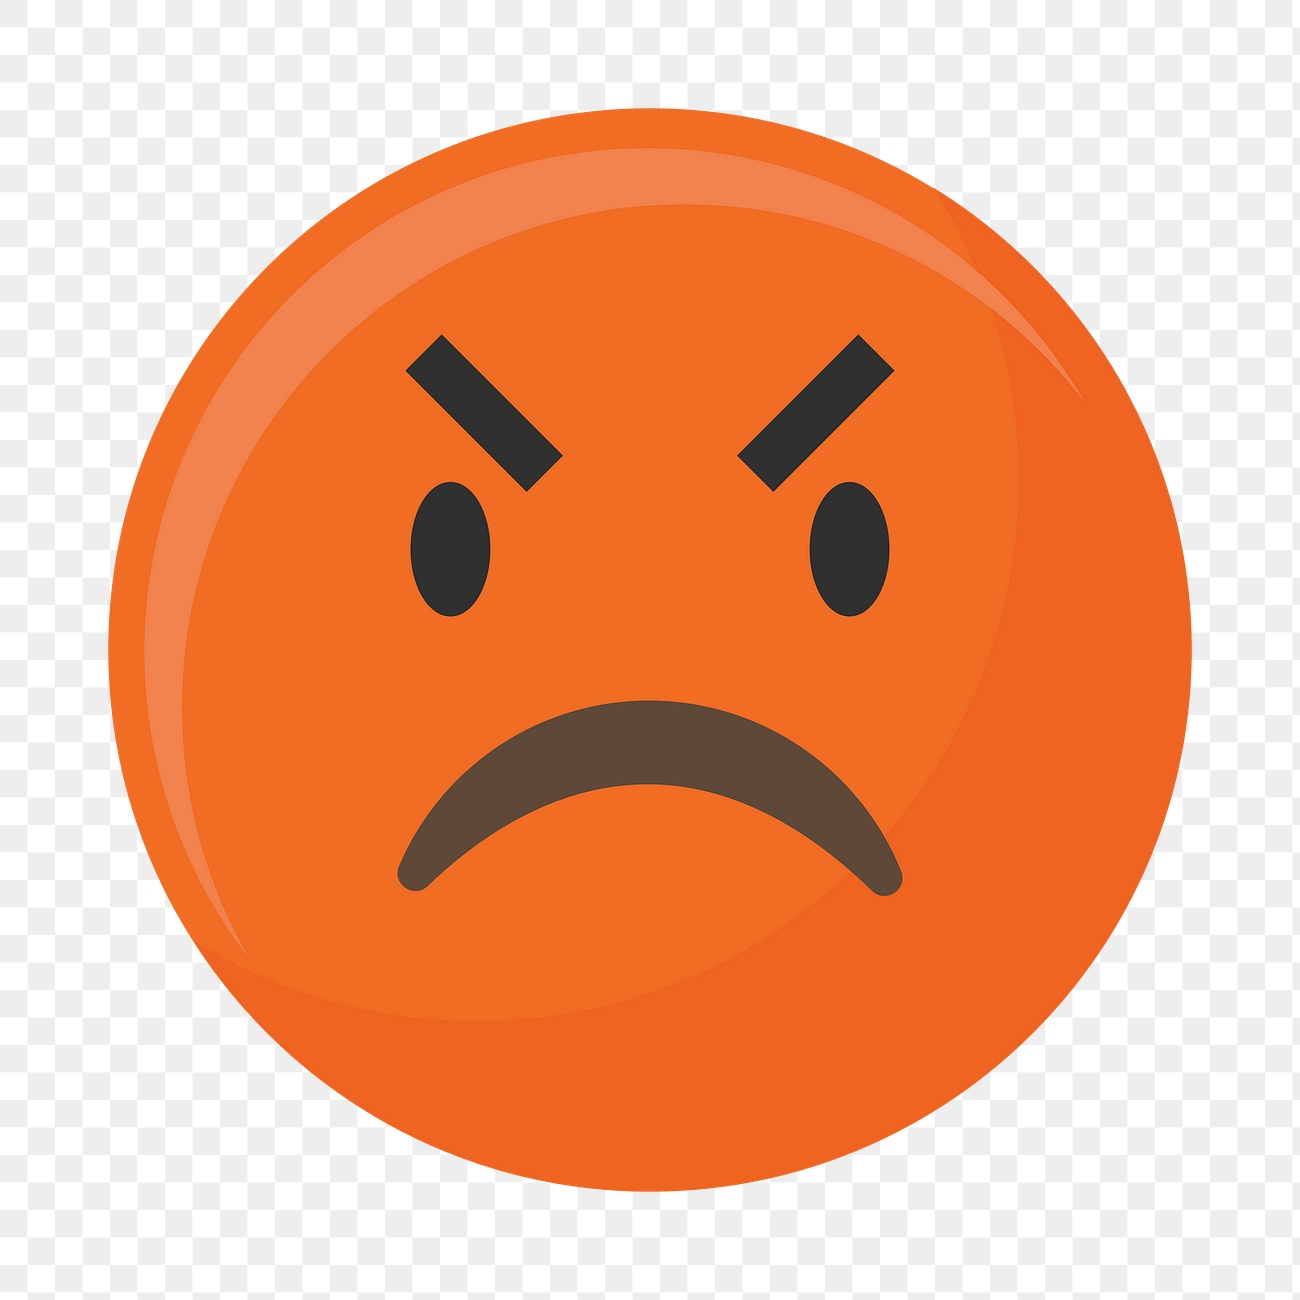 Angry face emoticon symbol transparent | Premium PNG Sticker - rawpixel